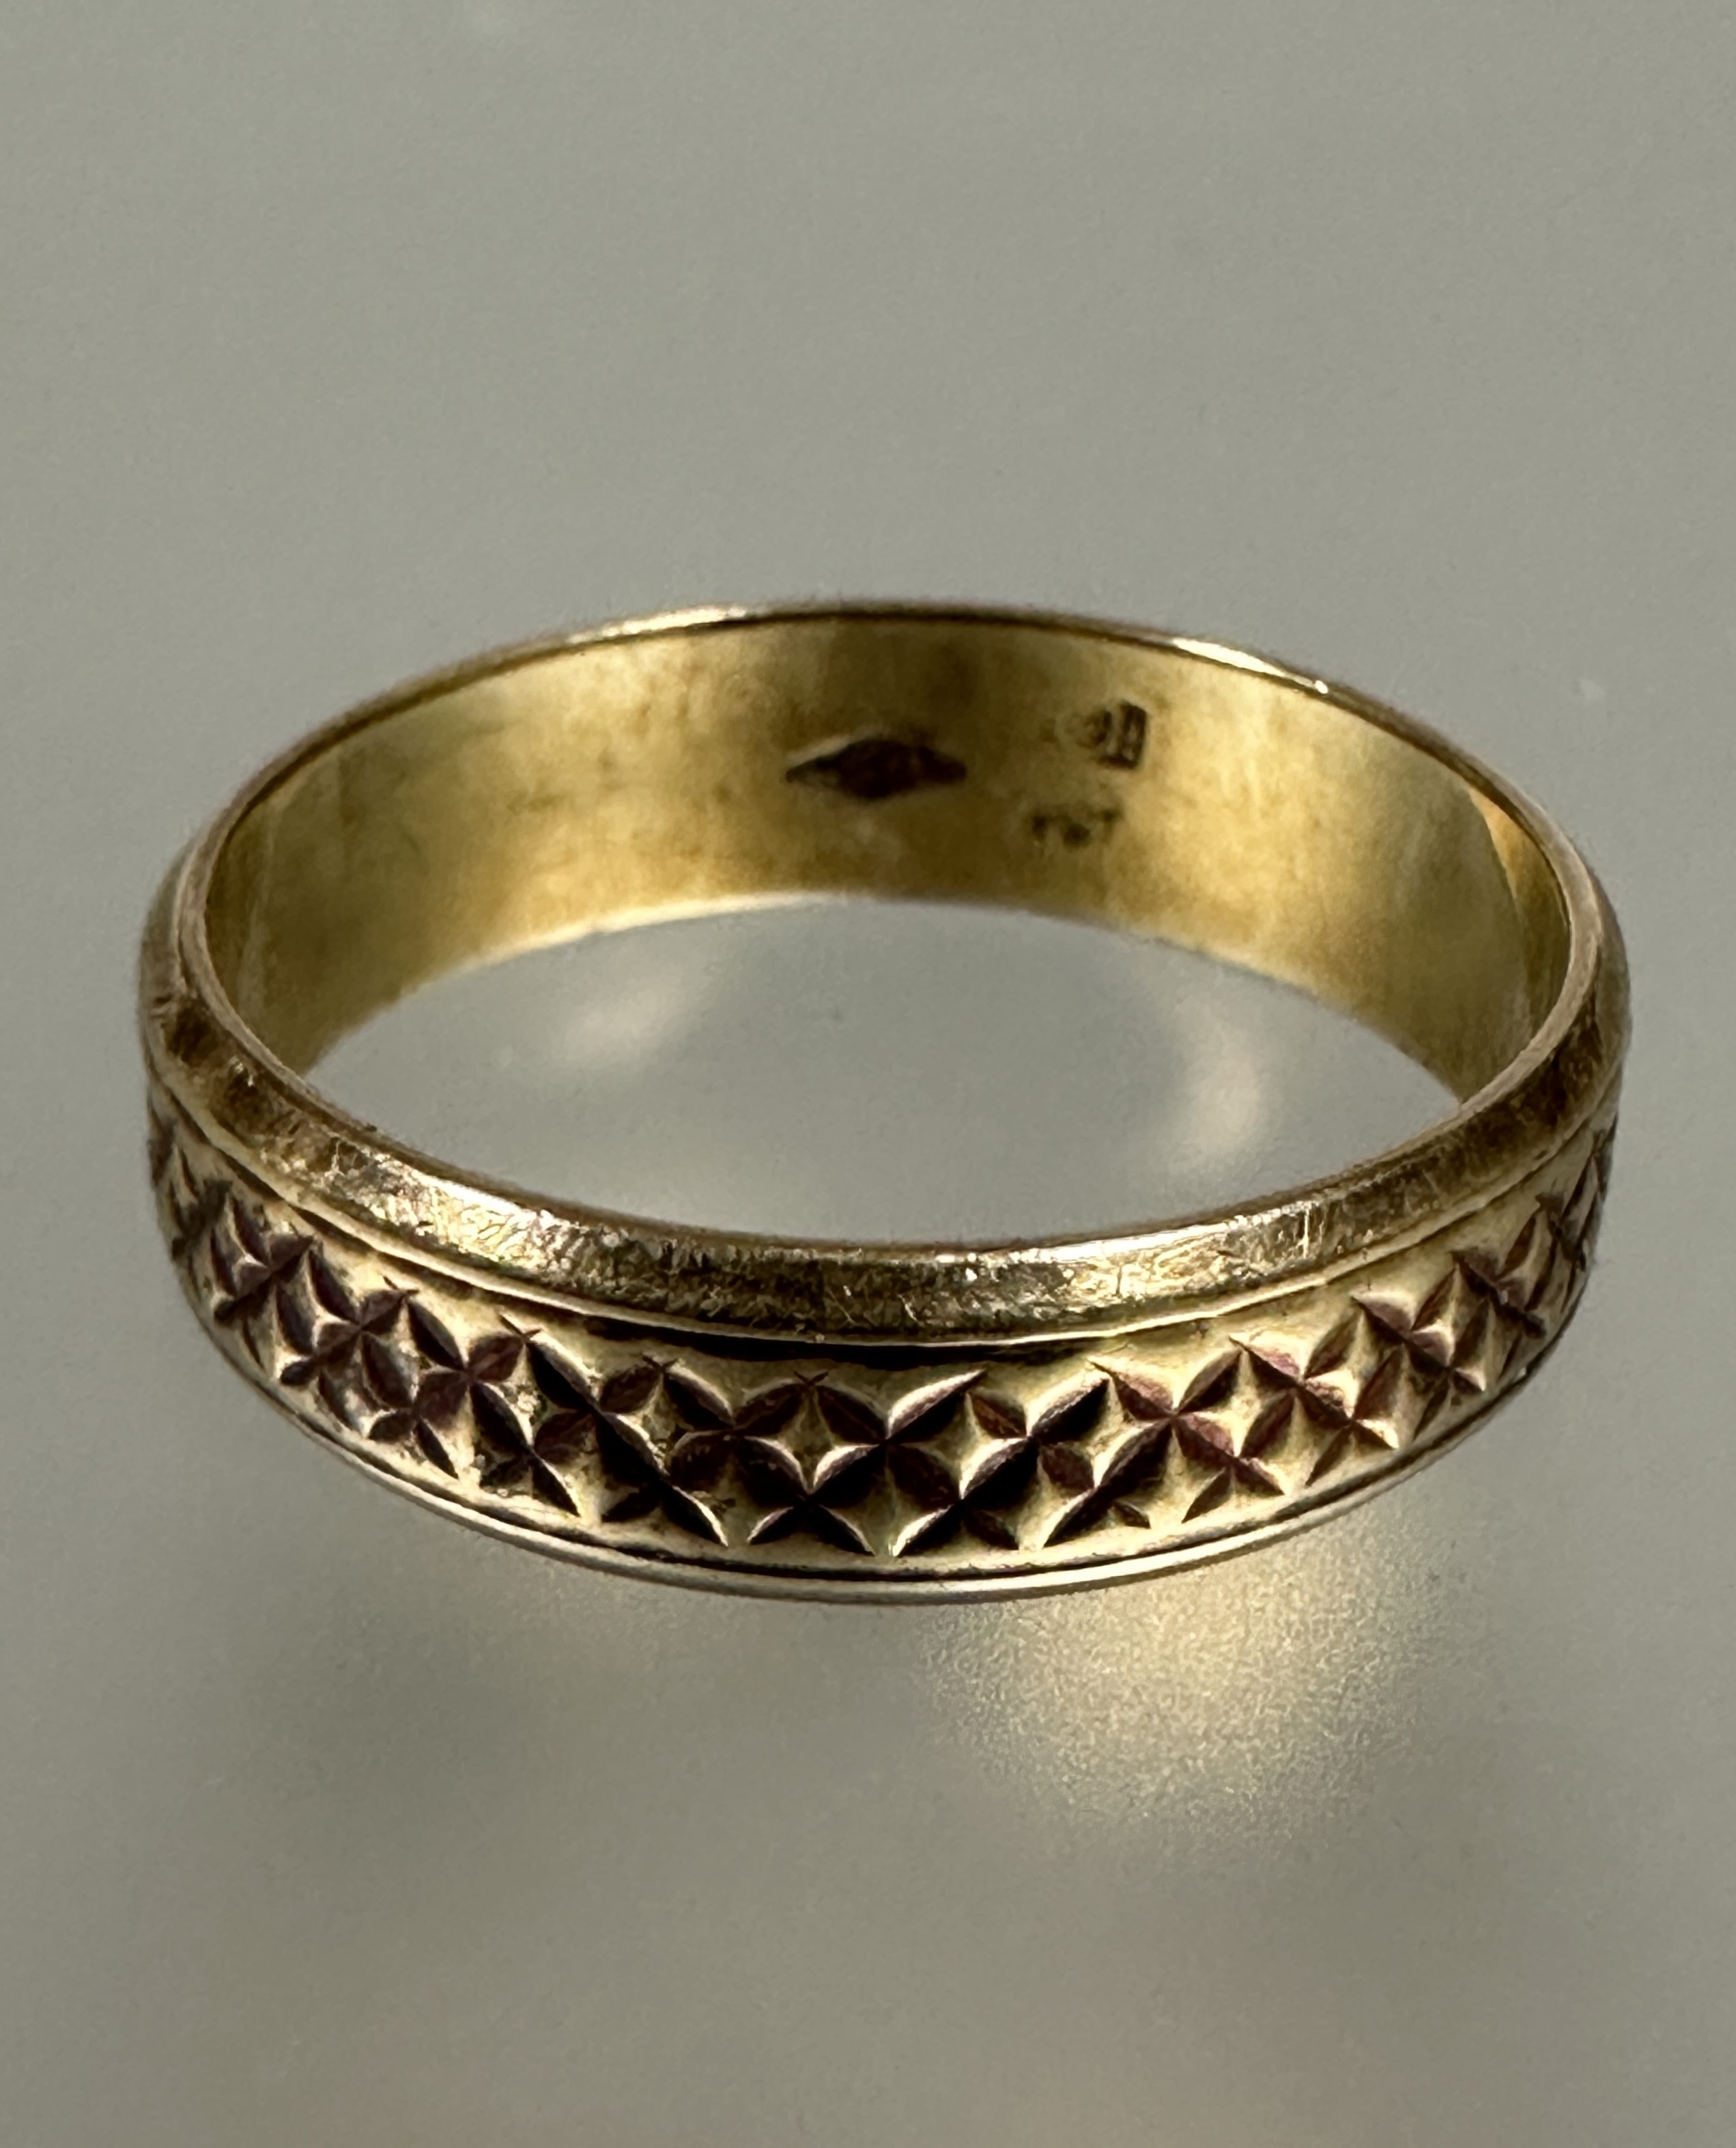 A 9ct gold wedding band with engine turned hatched decoration, R /S. 4.9 g